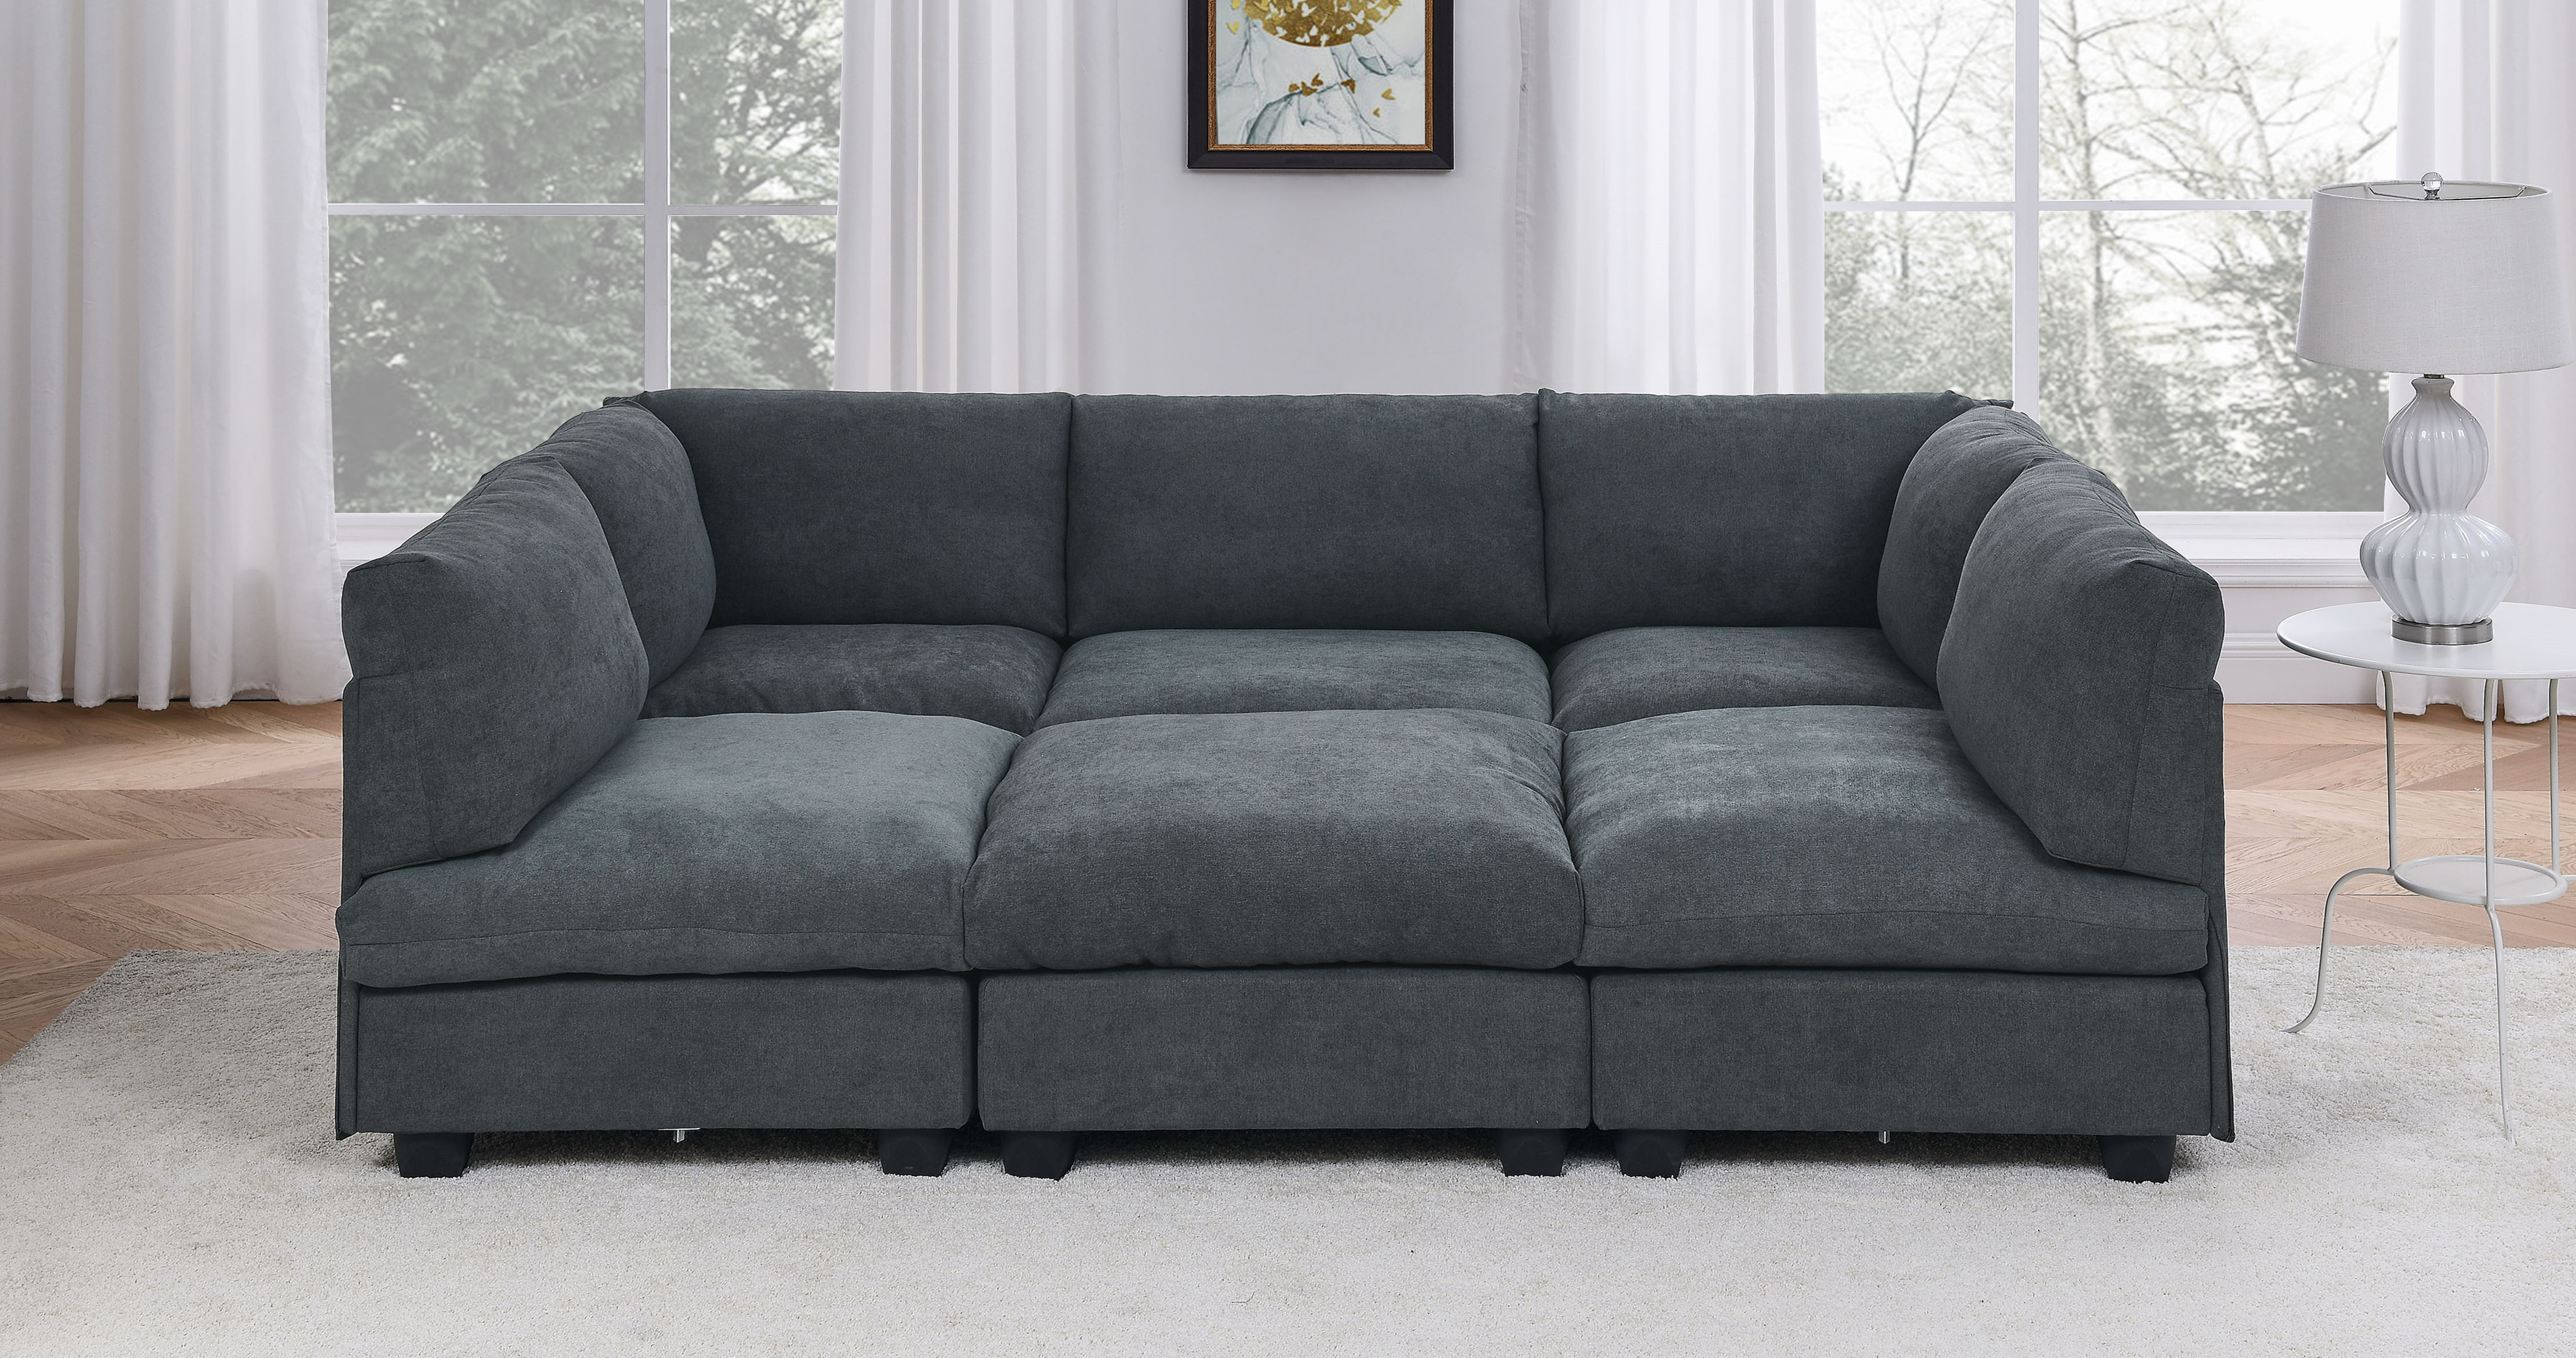 6 - Piece Upholstered Sectional